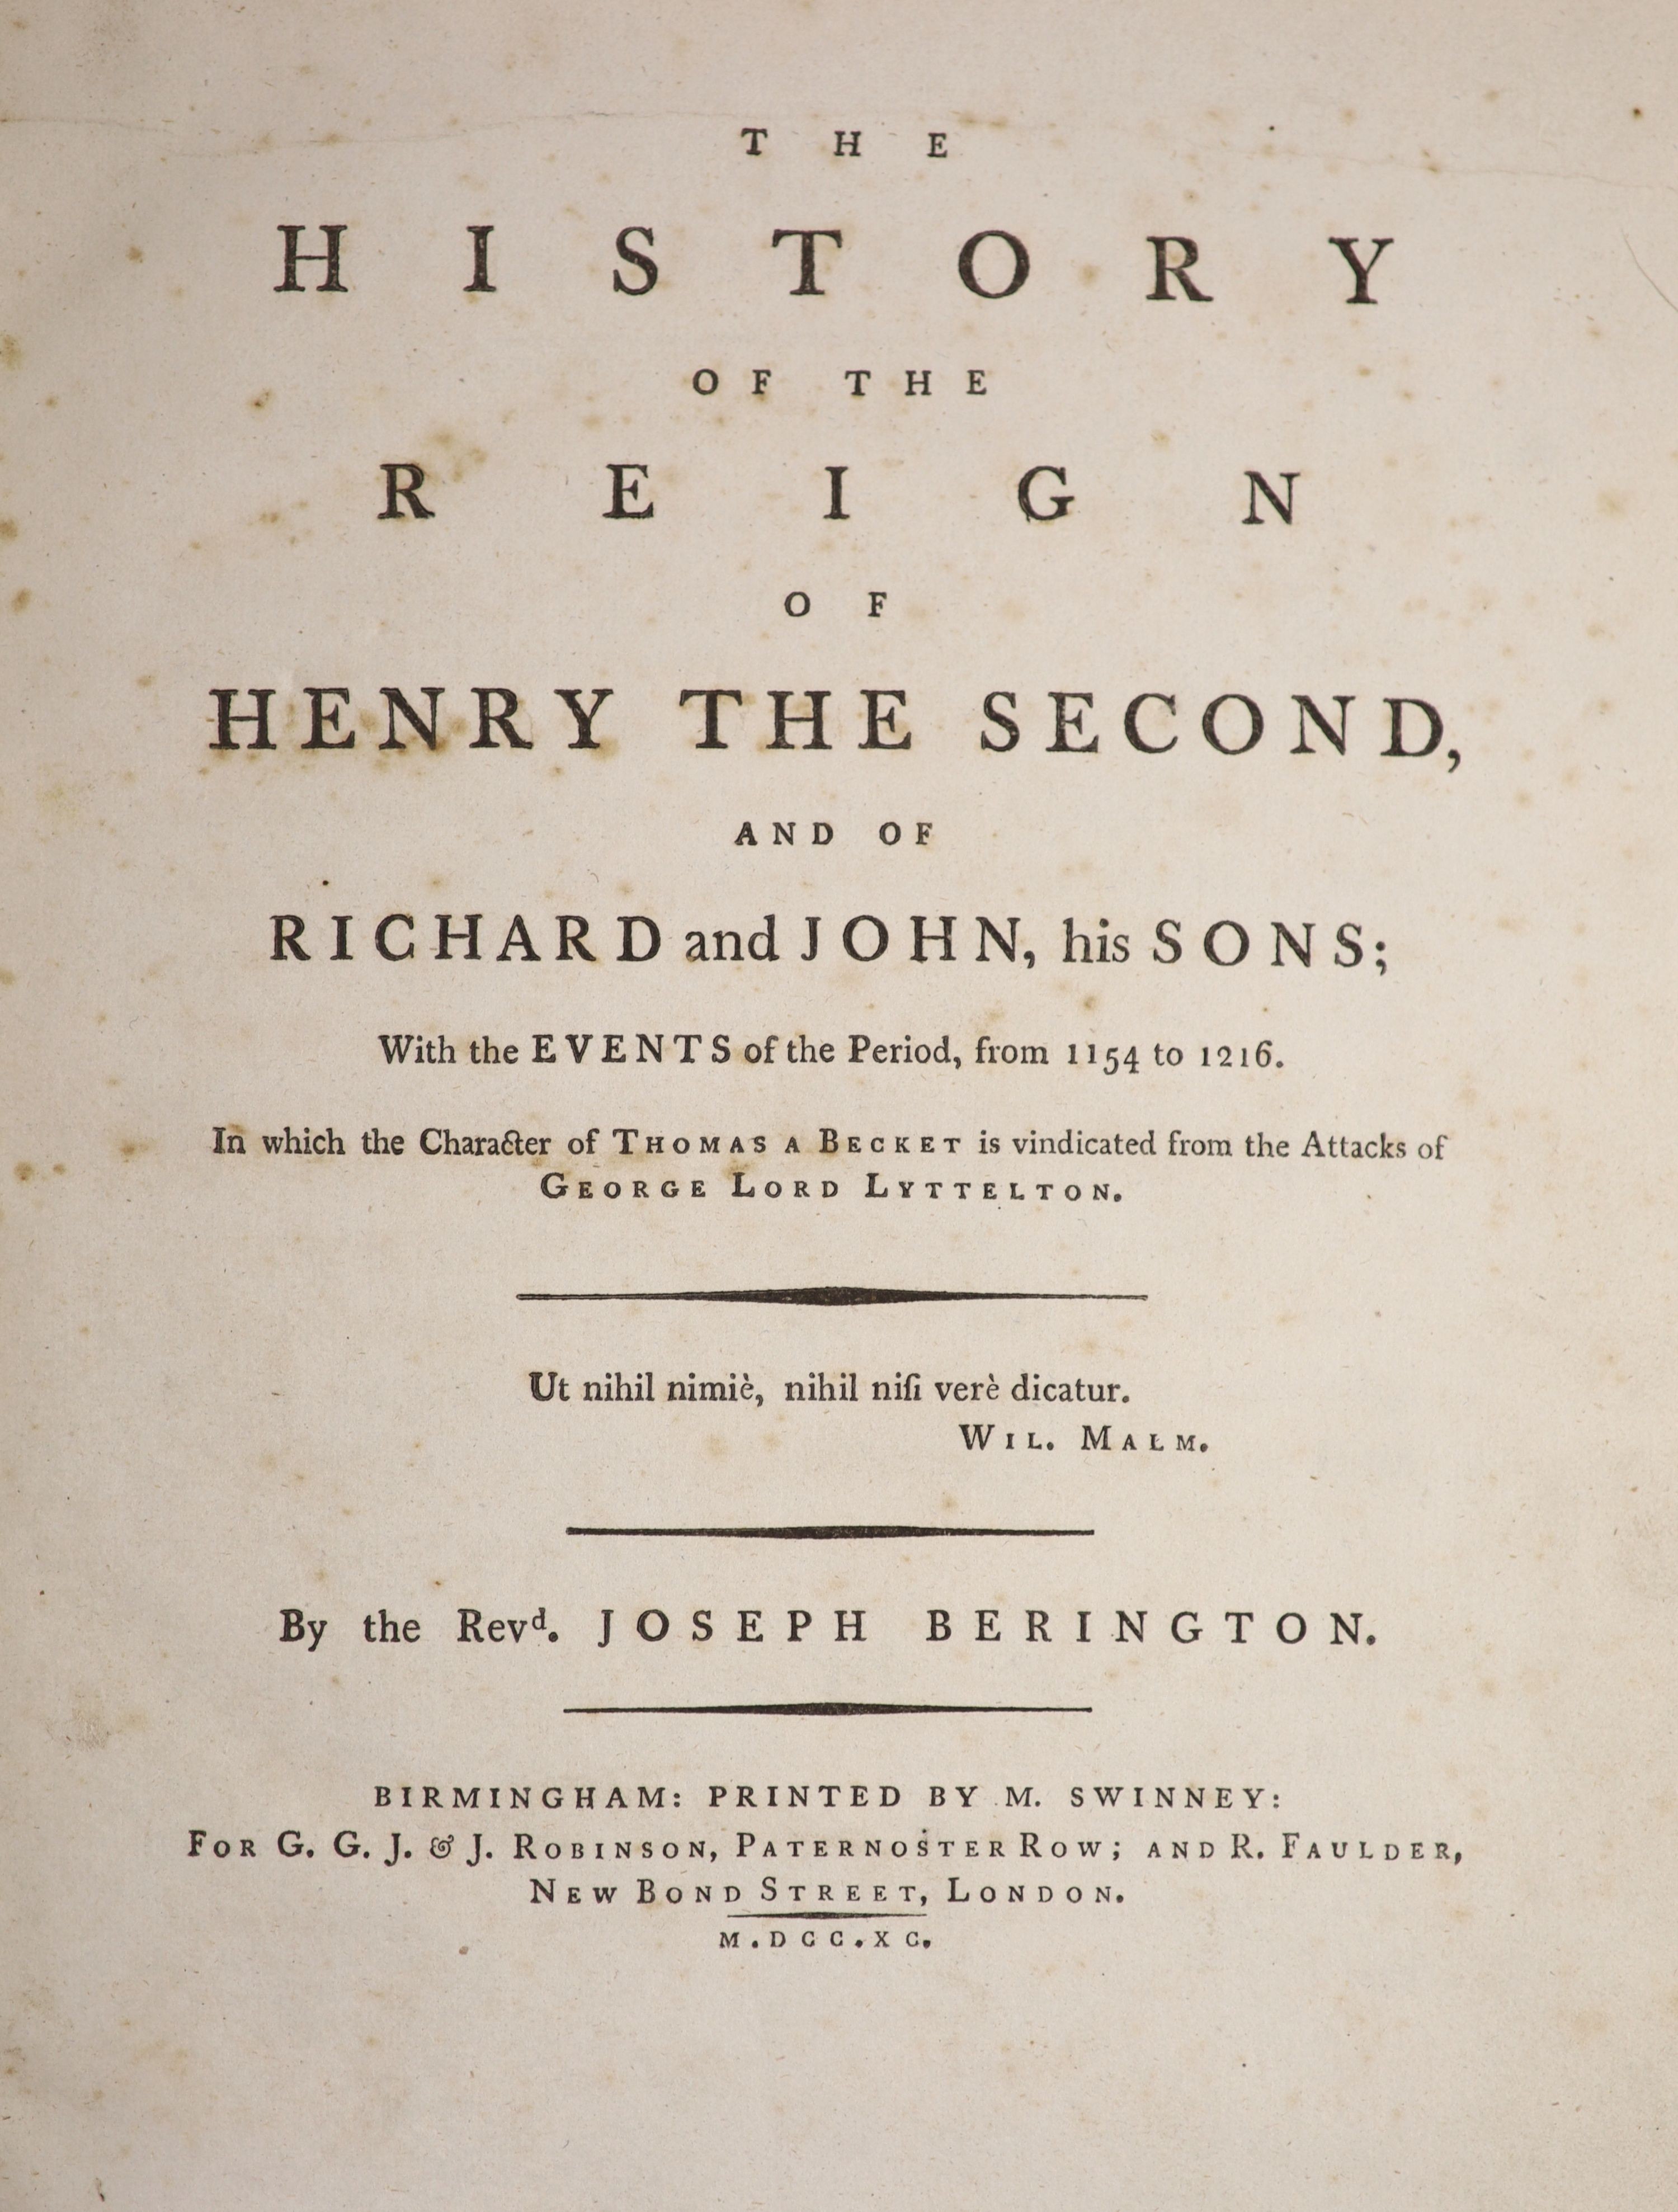 Berington, Rev. Joseph. The History of the Reign of Henry the Second, and of Richard and John, his sons ...